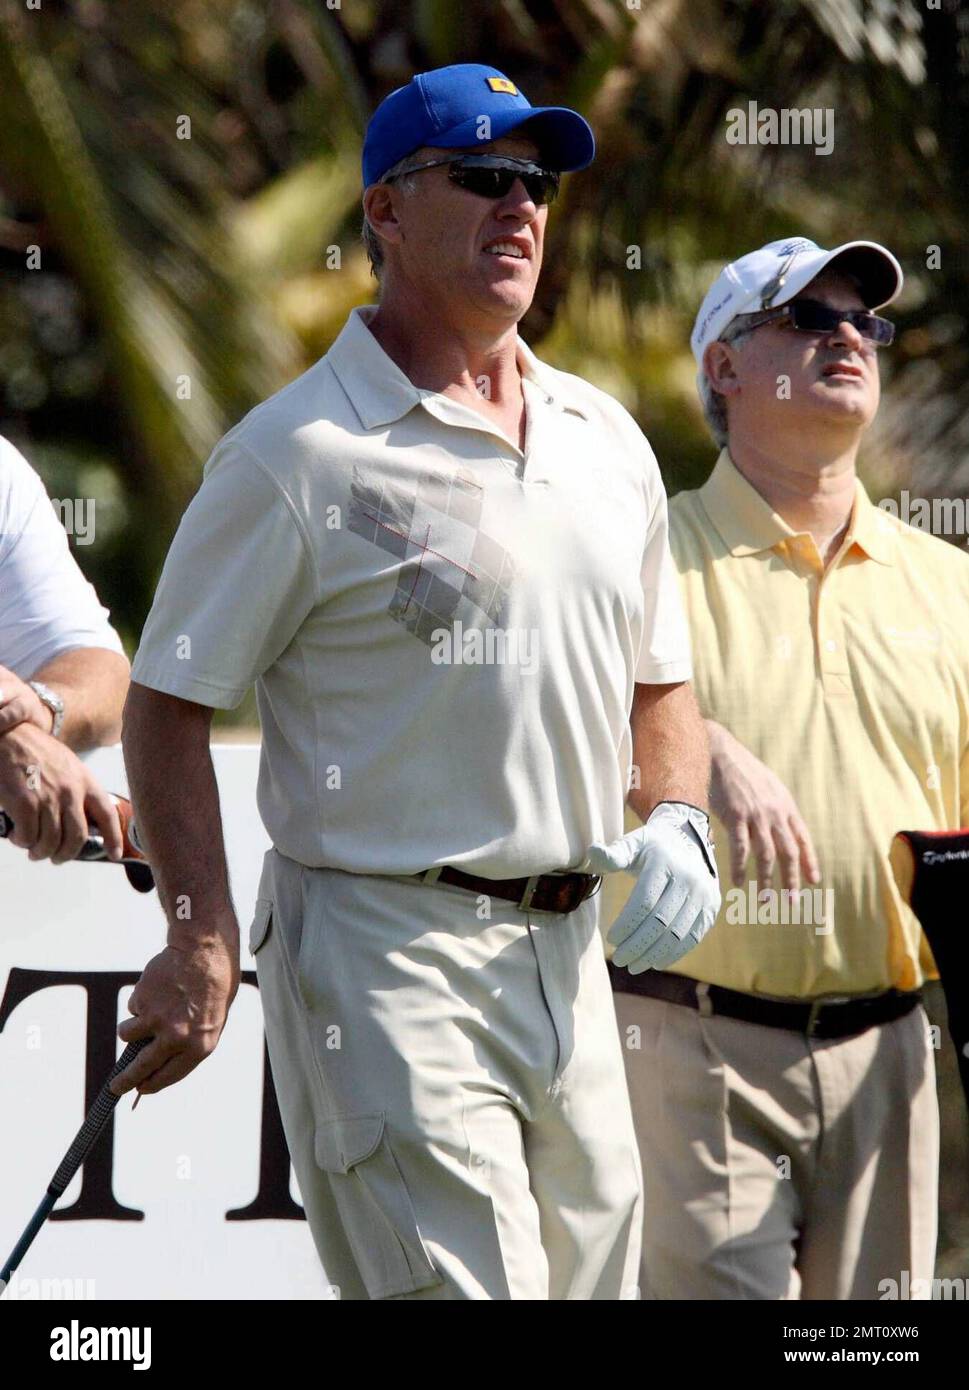 Legendary NFL Quarterback John Elway plays in The Michael Jordan Celebrity Invitational golf tournament held at the luxurious One and Only Ocean Club Golf Course on Paradise Island.  The MJCI organization brings in an incredible array of talent from the worlds of sport and entertainment to compete on the course and participate in various events for charity in this annual event.  In it's seventh year the charity has raised over $4 million for several deserving causes.  More than $500, 000 will be donated to this yearÕs charities including the Butch Kersner Summit Foundation, Make-A-Wish Foundat Stock Photo